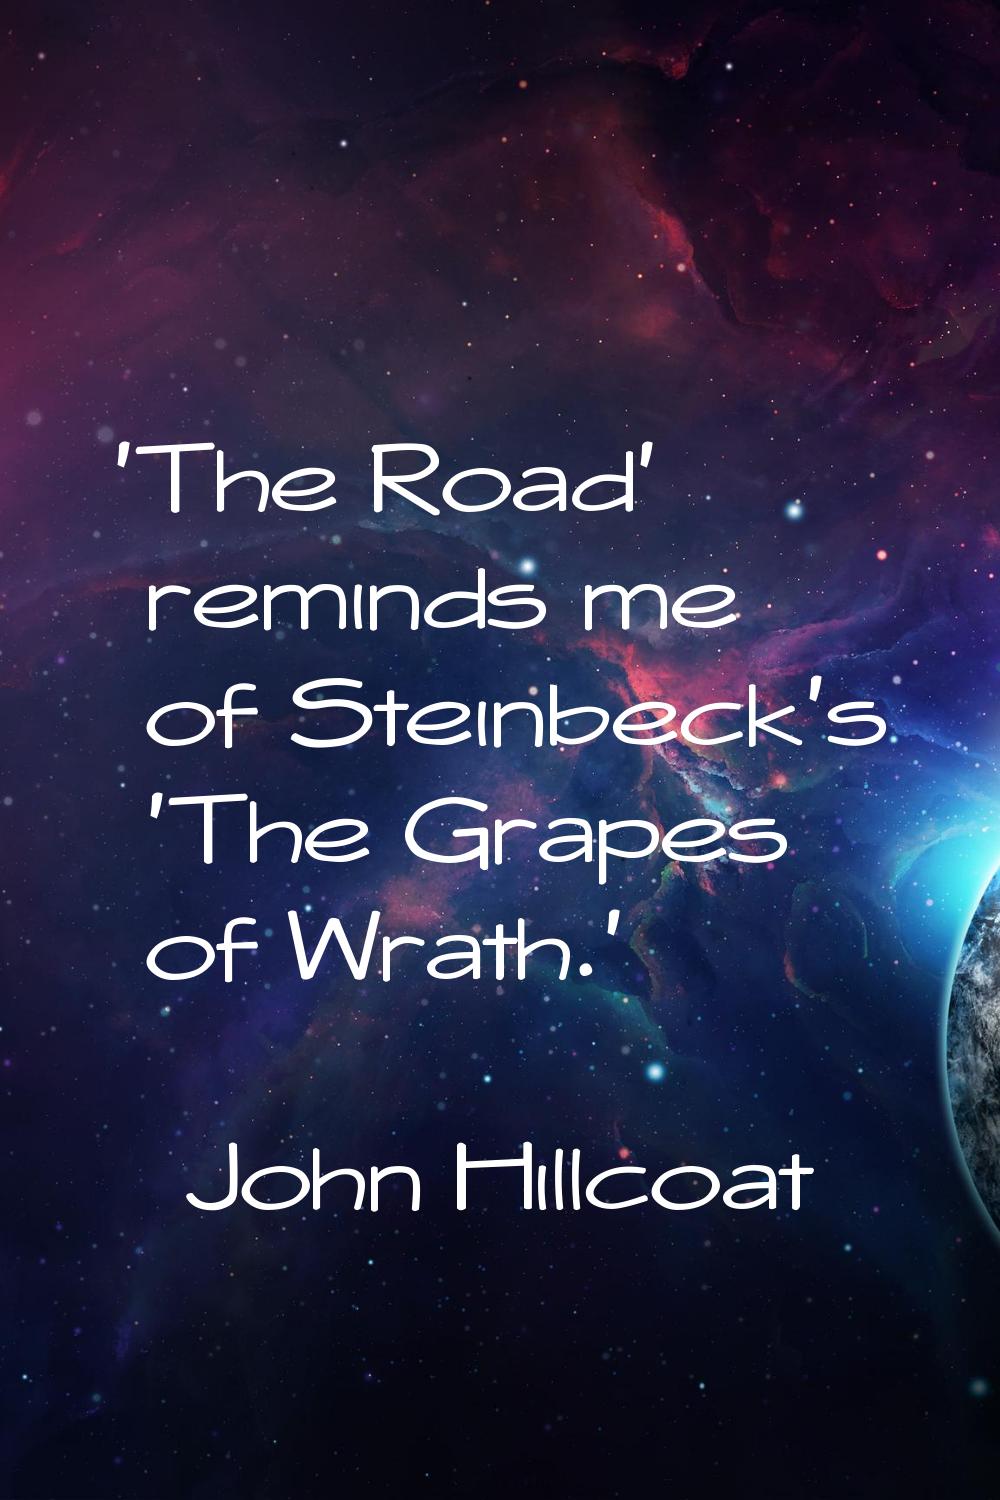 'The Road' reminds me of Steinbeck's 'The Grapes of Wrath.'